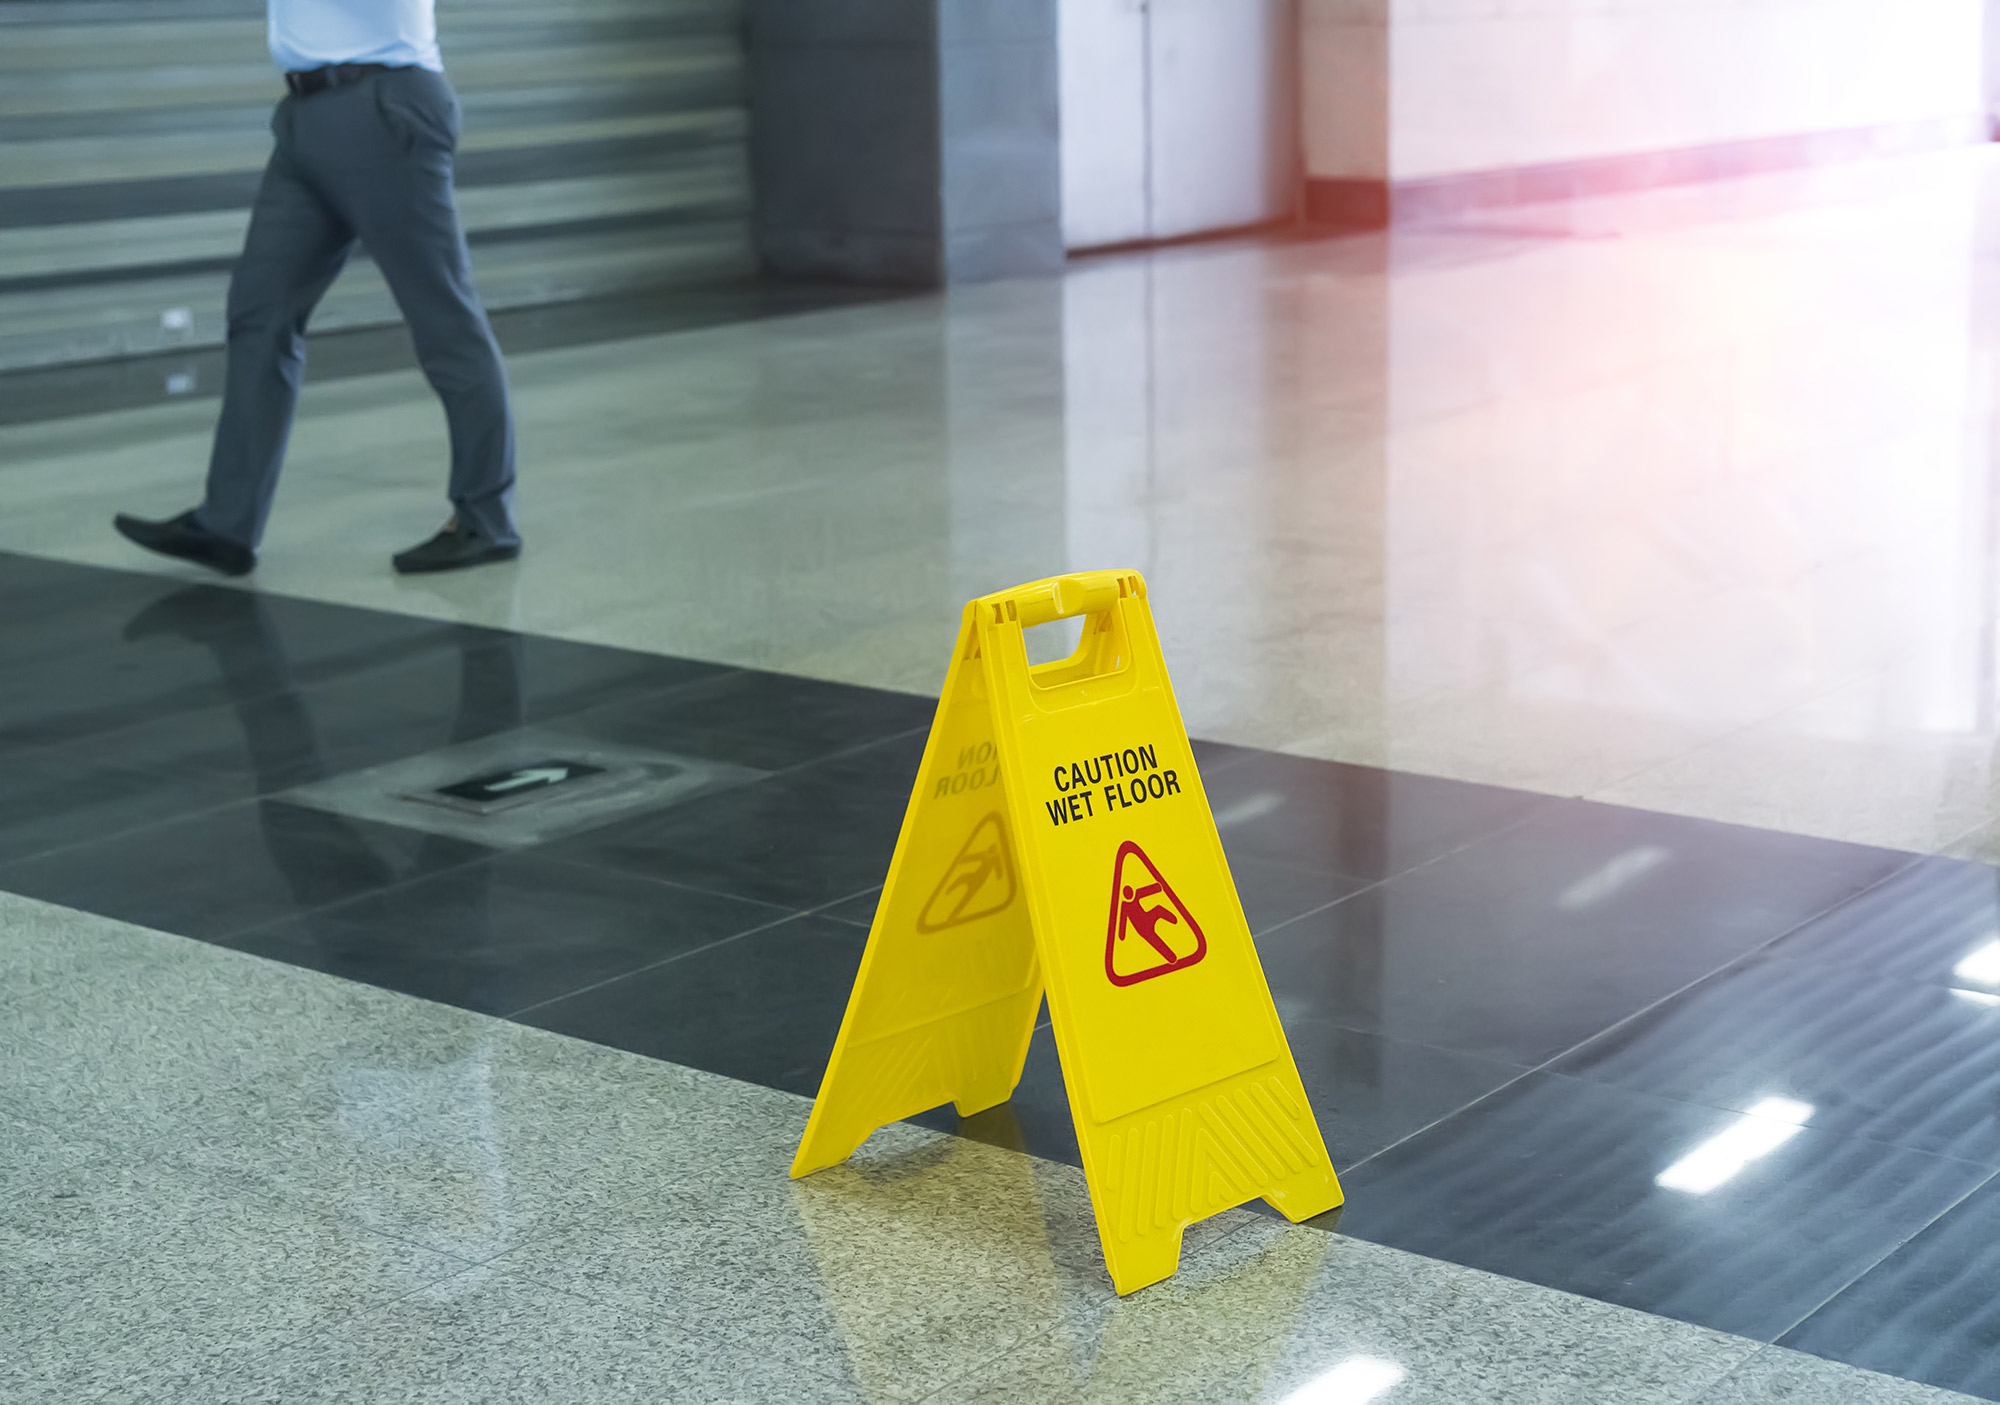 blog-premises-liability-slip-and-fall-accident